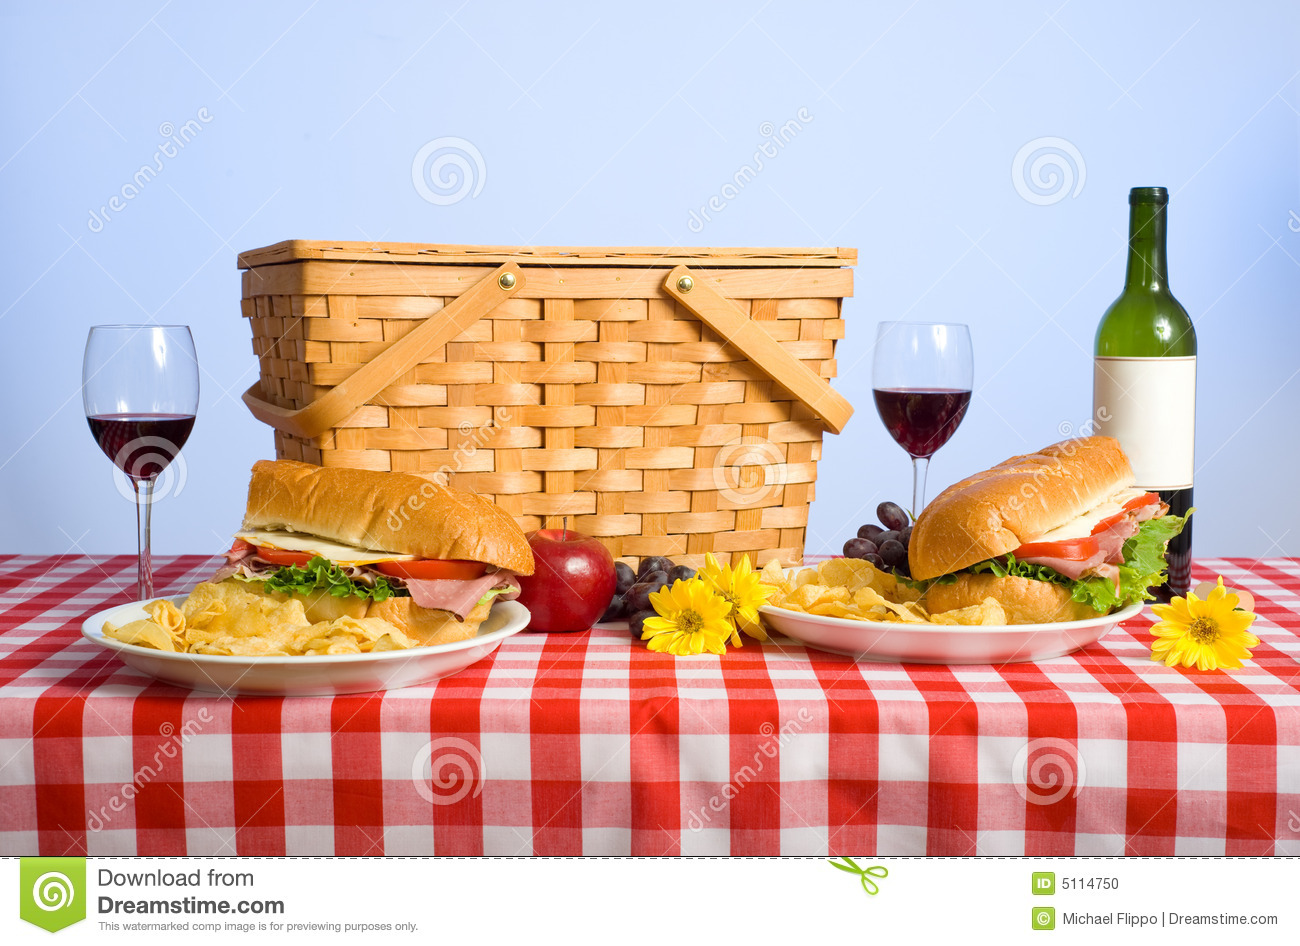 Picnic Lunch On A Red And White Gingham Tablecloth Including A